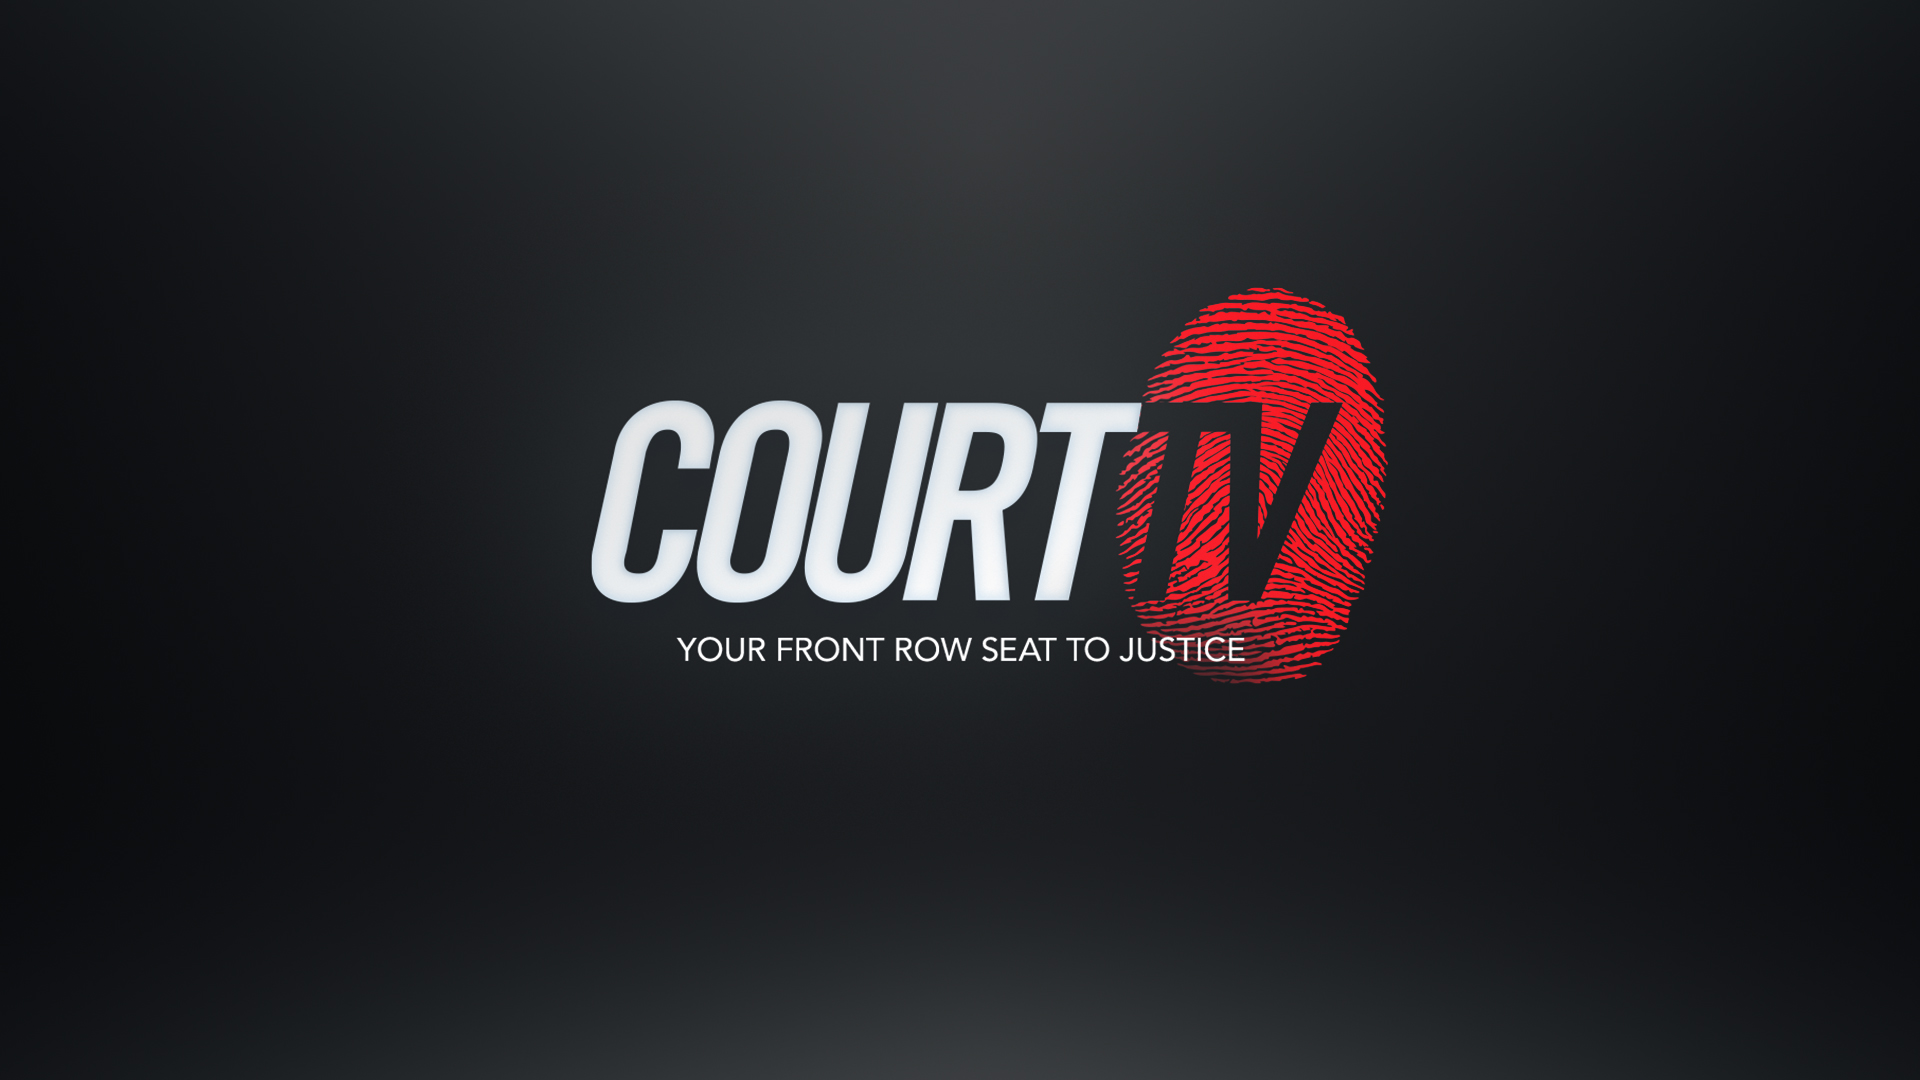 Court TV Puts its Own Spin on ‘Free Trial’ Offer